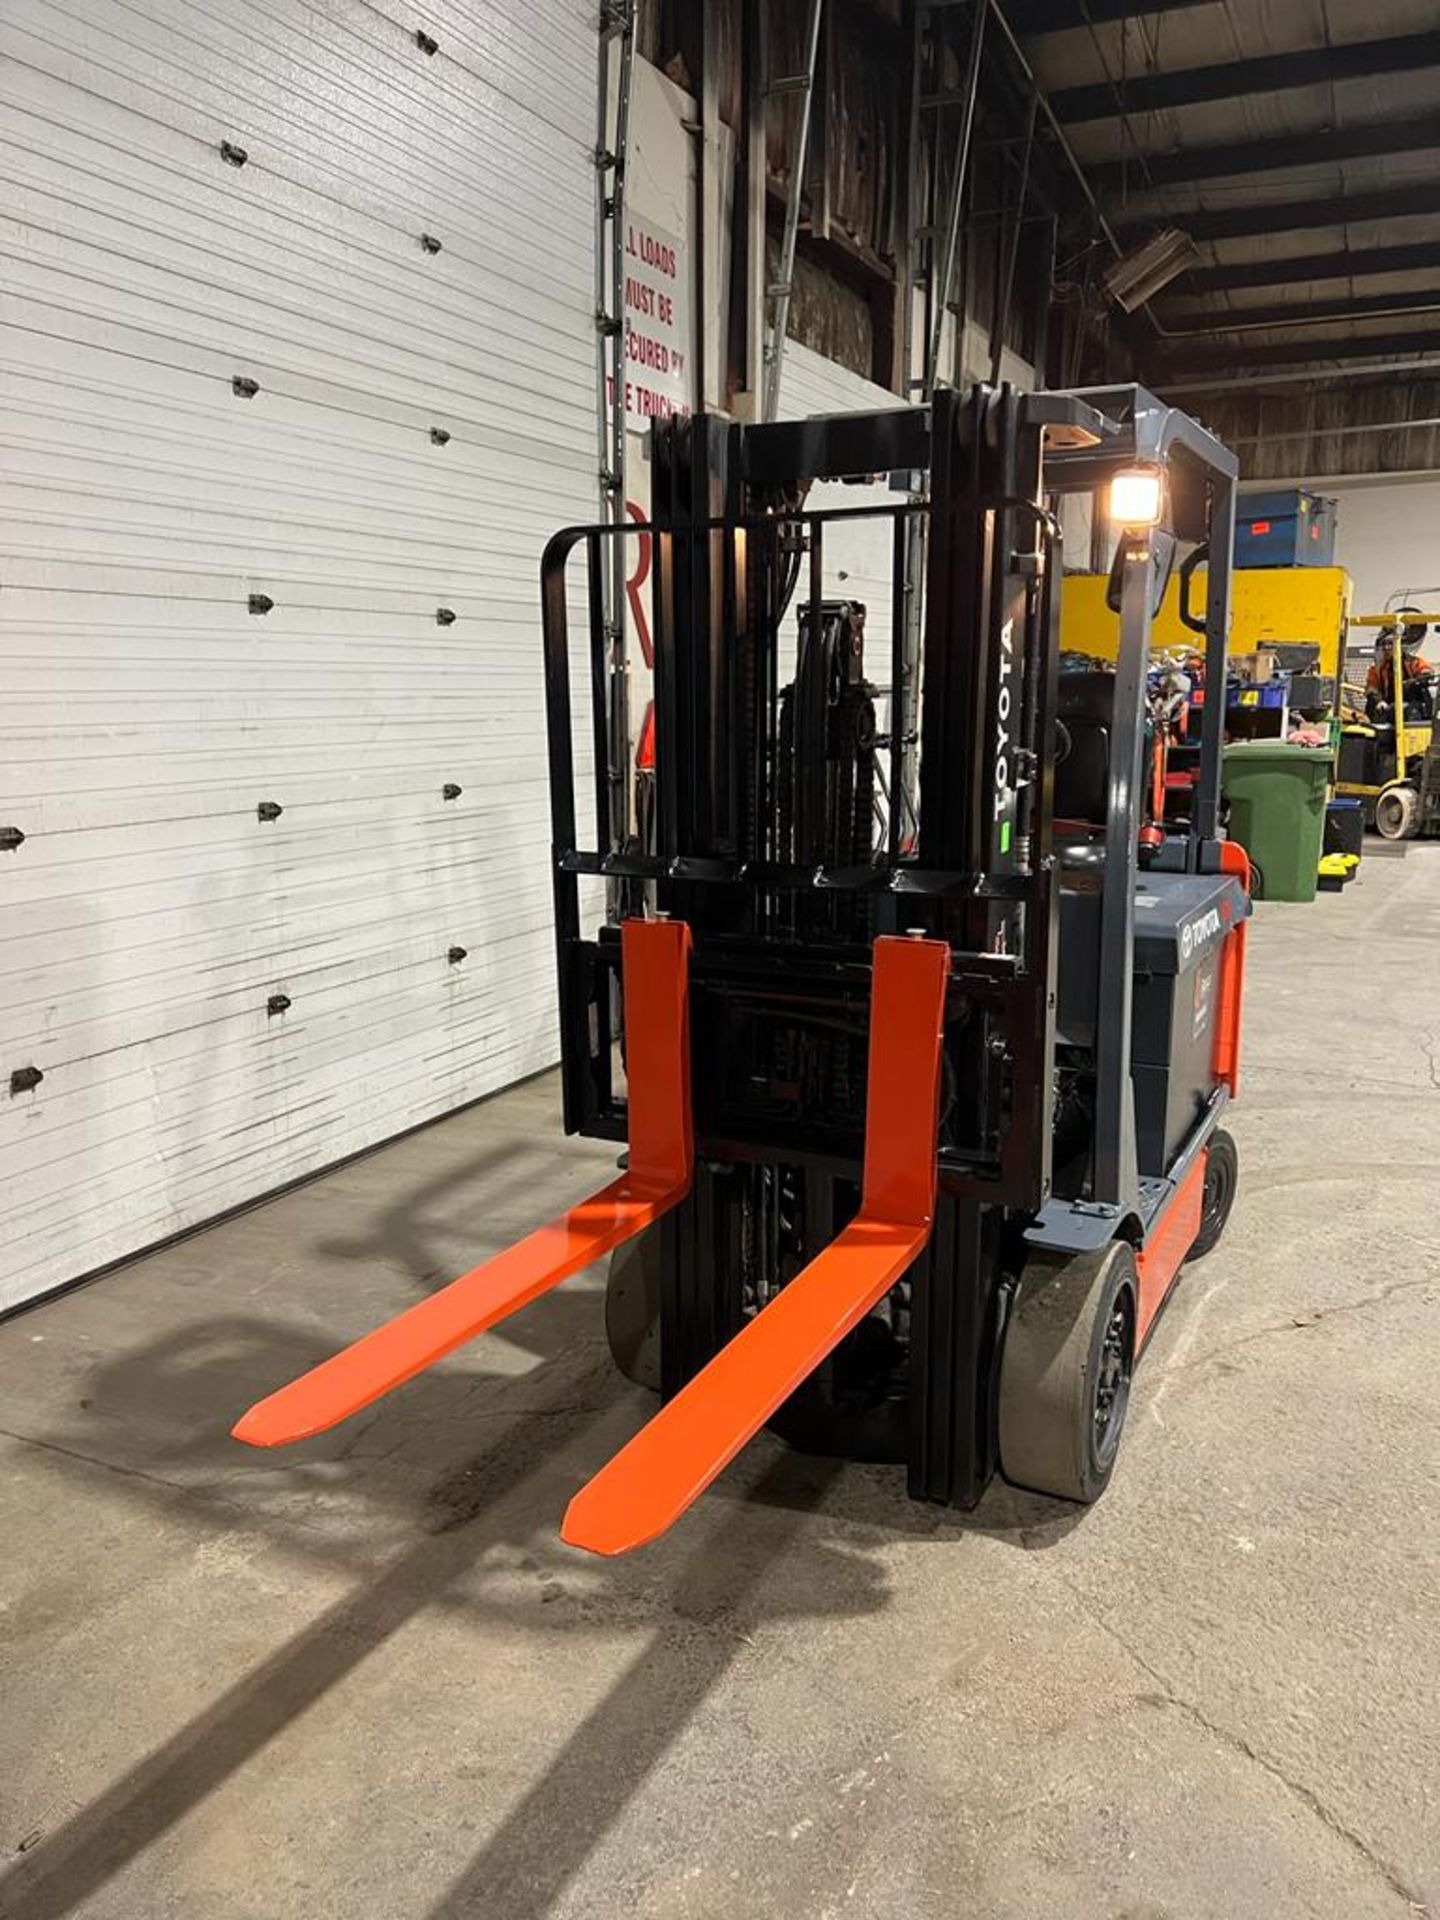 2014 Toyota 5,000lbs Capacity Forklift Electric 48V with 48" FORKS with Sideshift & Plumbed for Fork - Image 2 of 5